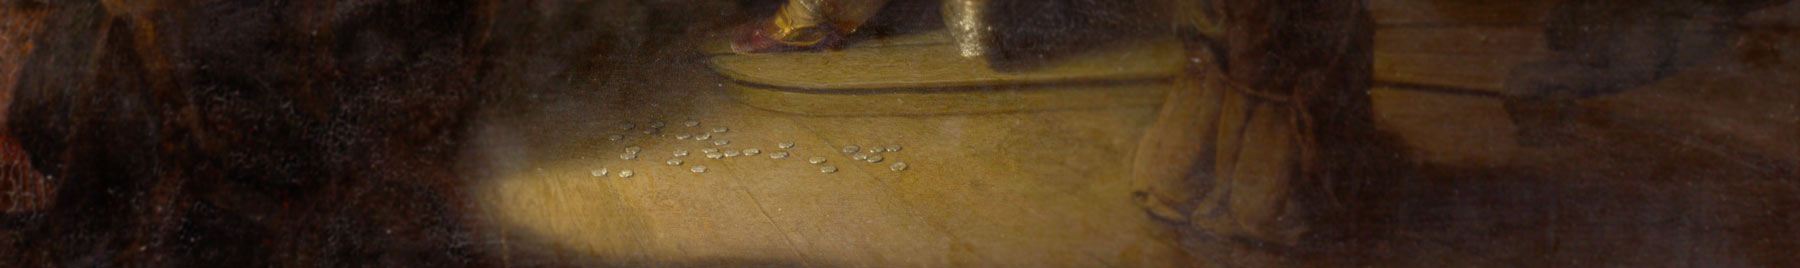 Detail from Repentant Judas Returning the Pieces of Silver, 1629